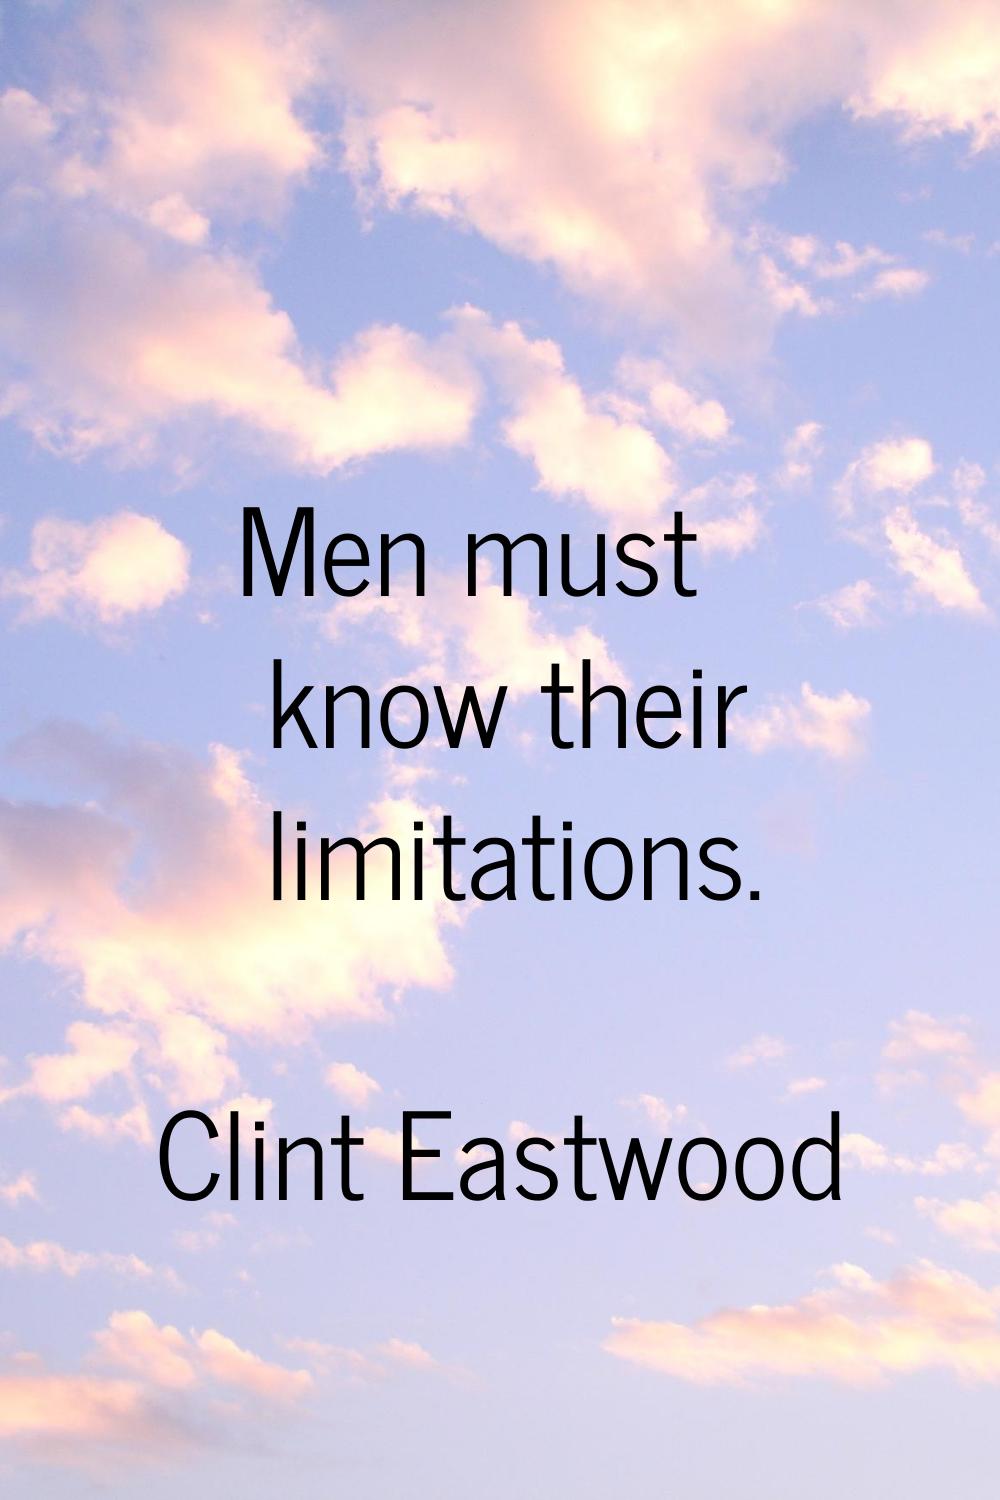 Men must know their limitations.